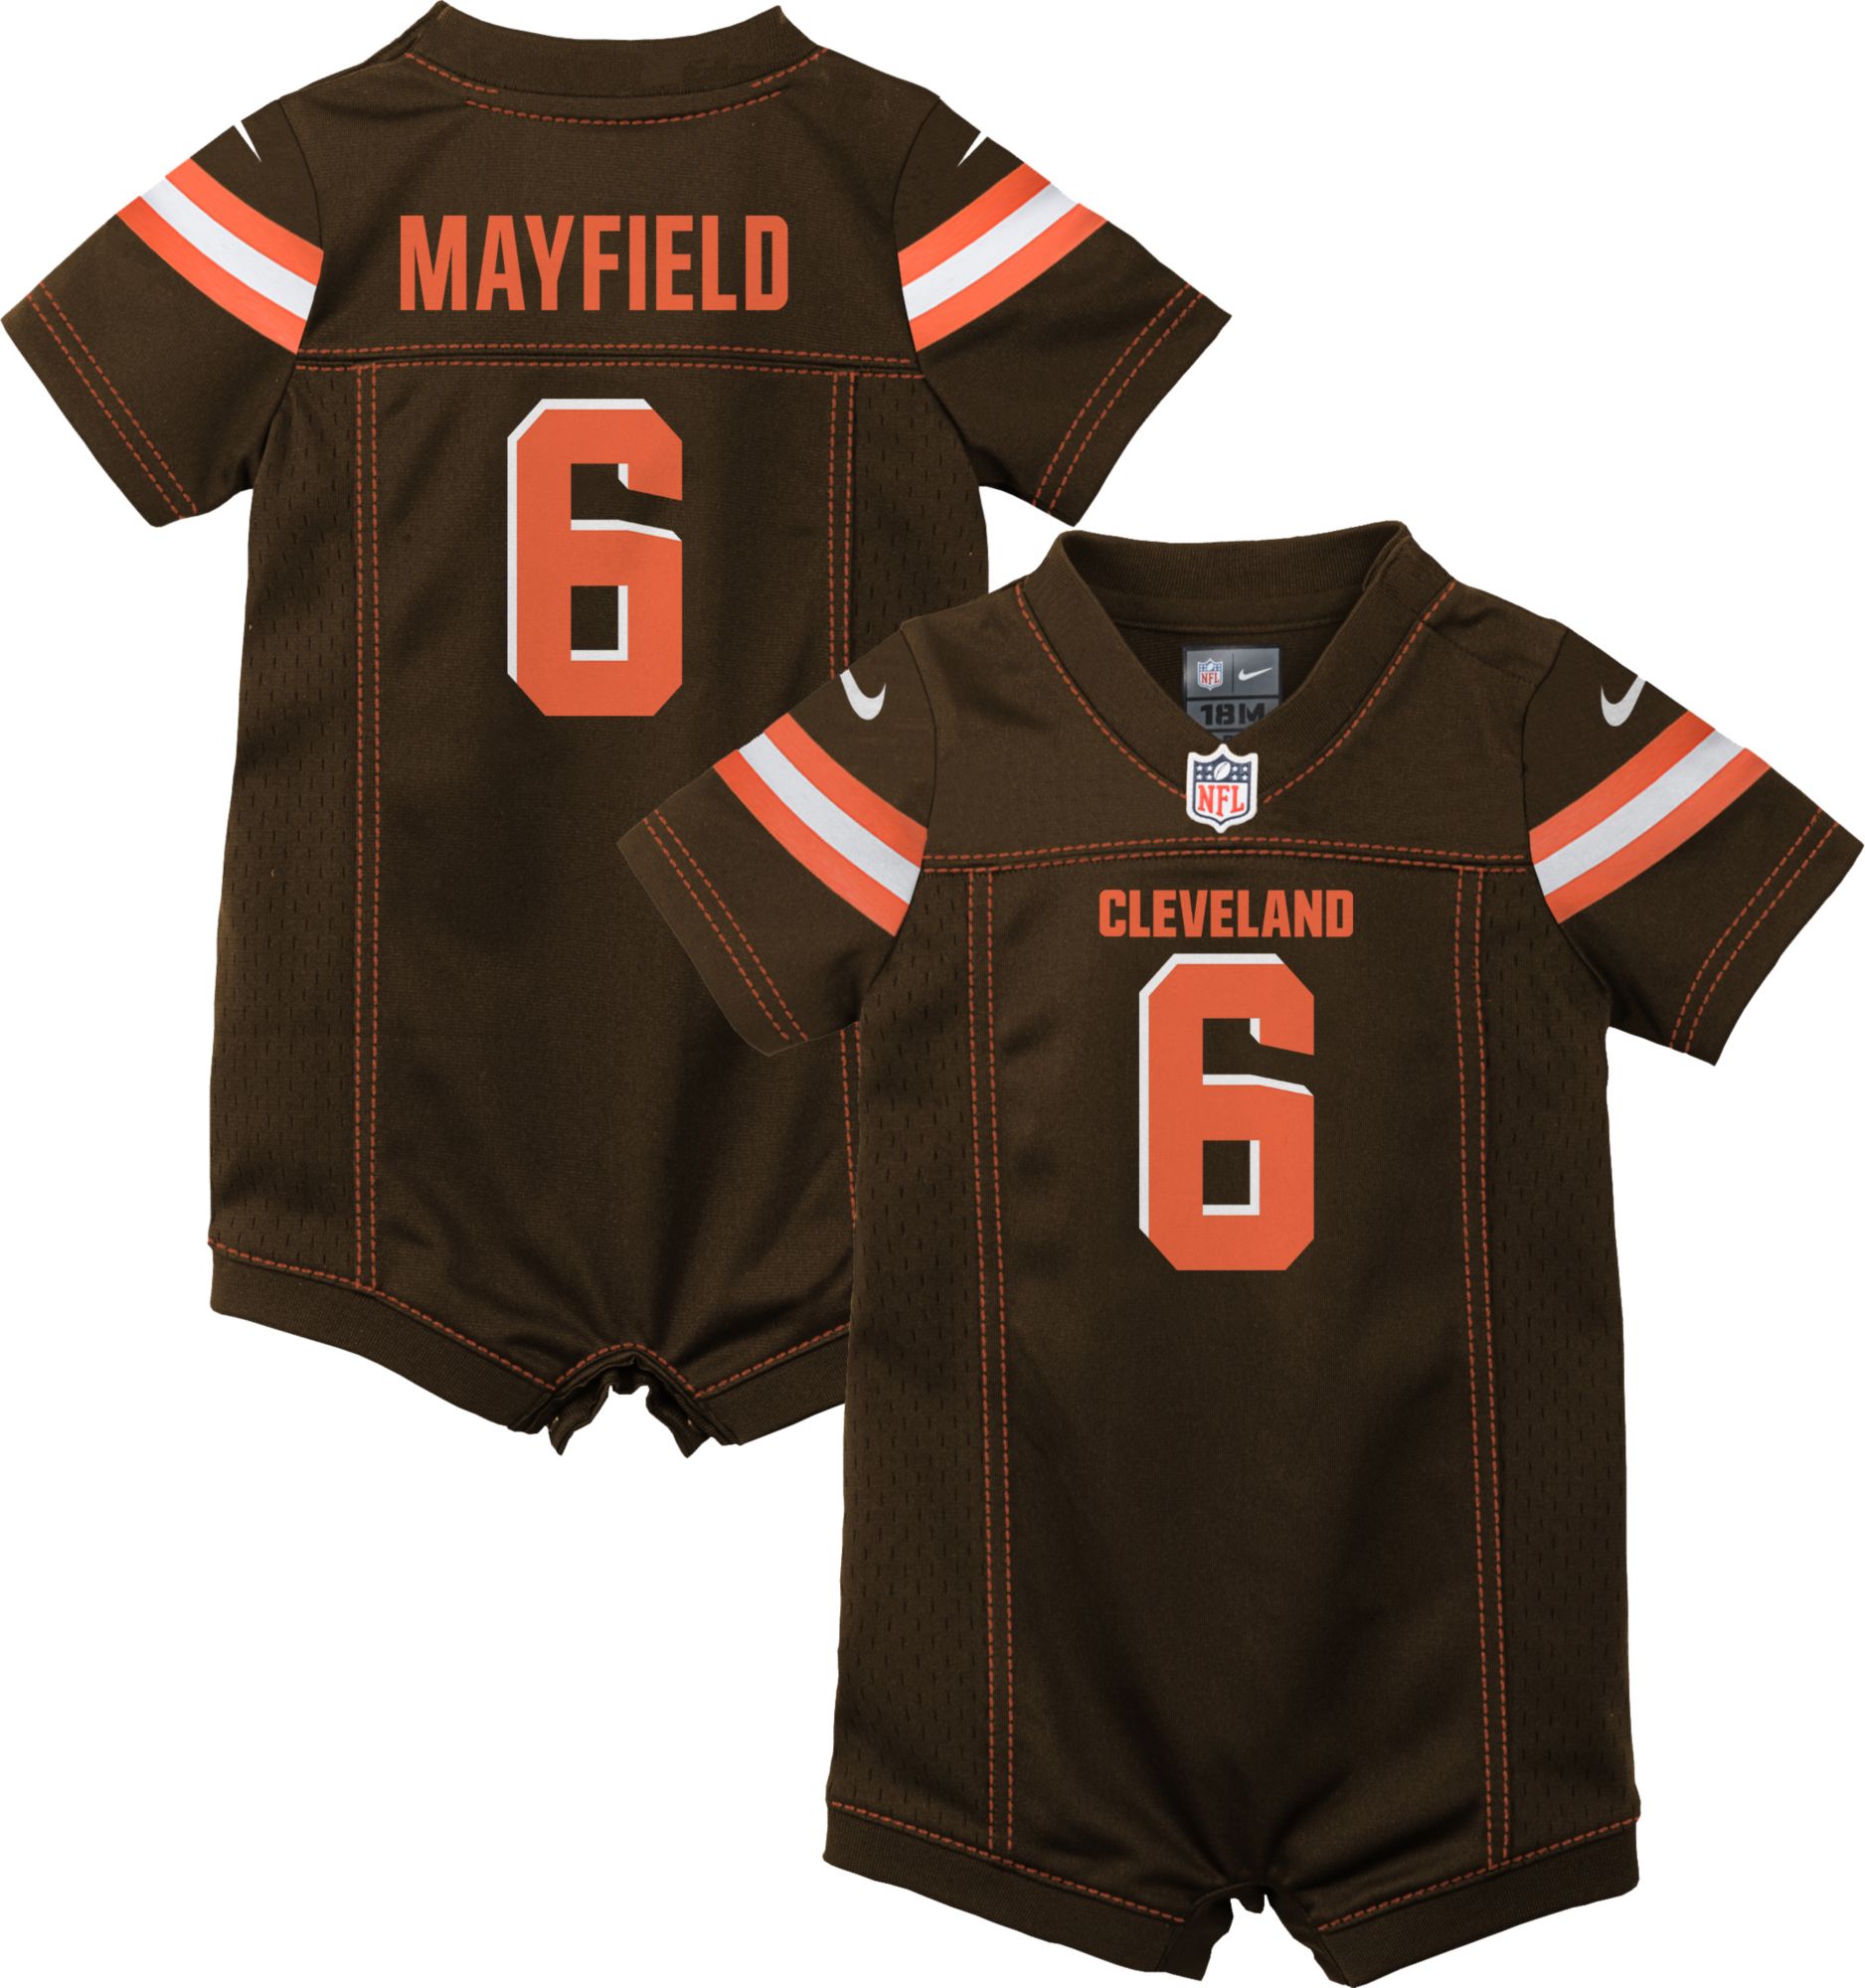 cleveland browns infant jersey